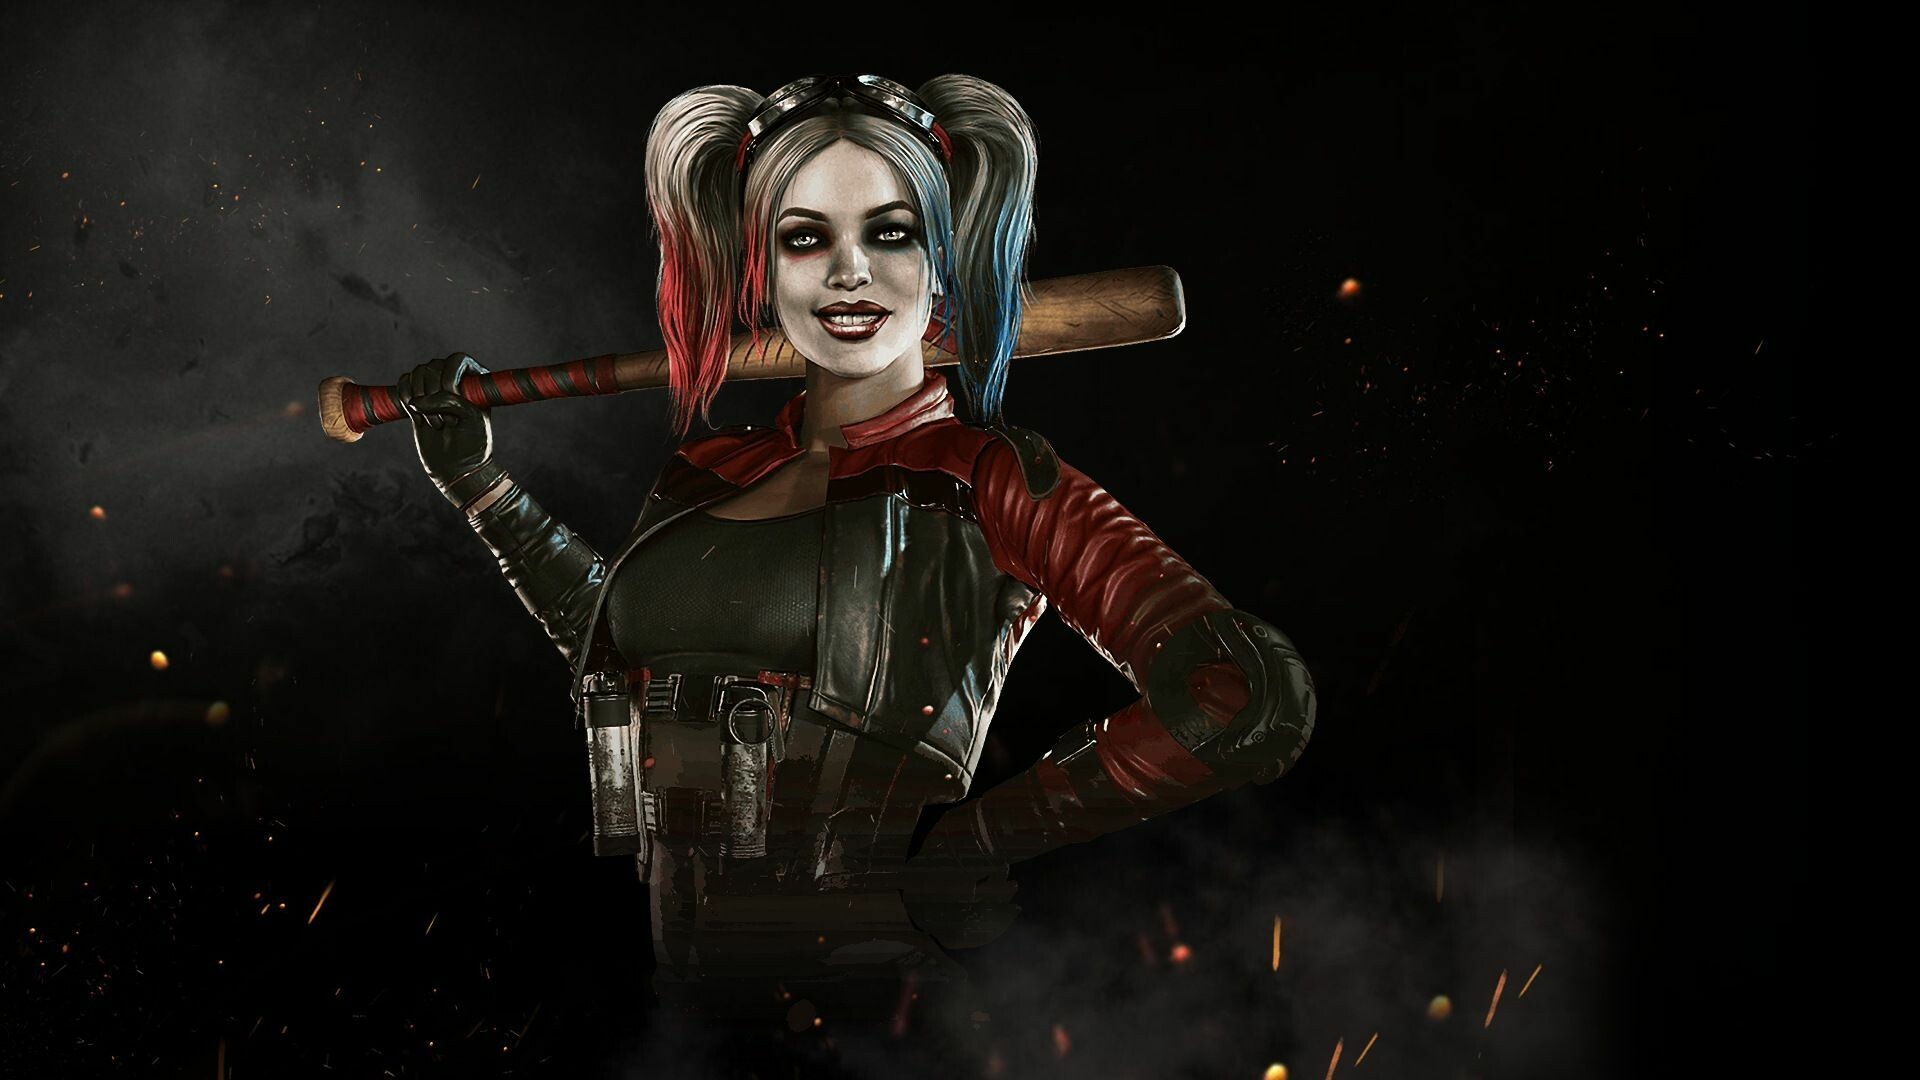 Injustice: Harley Quinn, A criminal psychiatrist, who was seduced by her patient: the Joker. 1920x1080 Full HD Background.